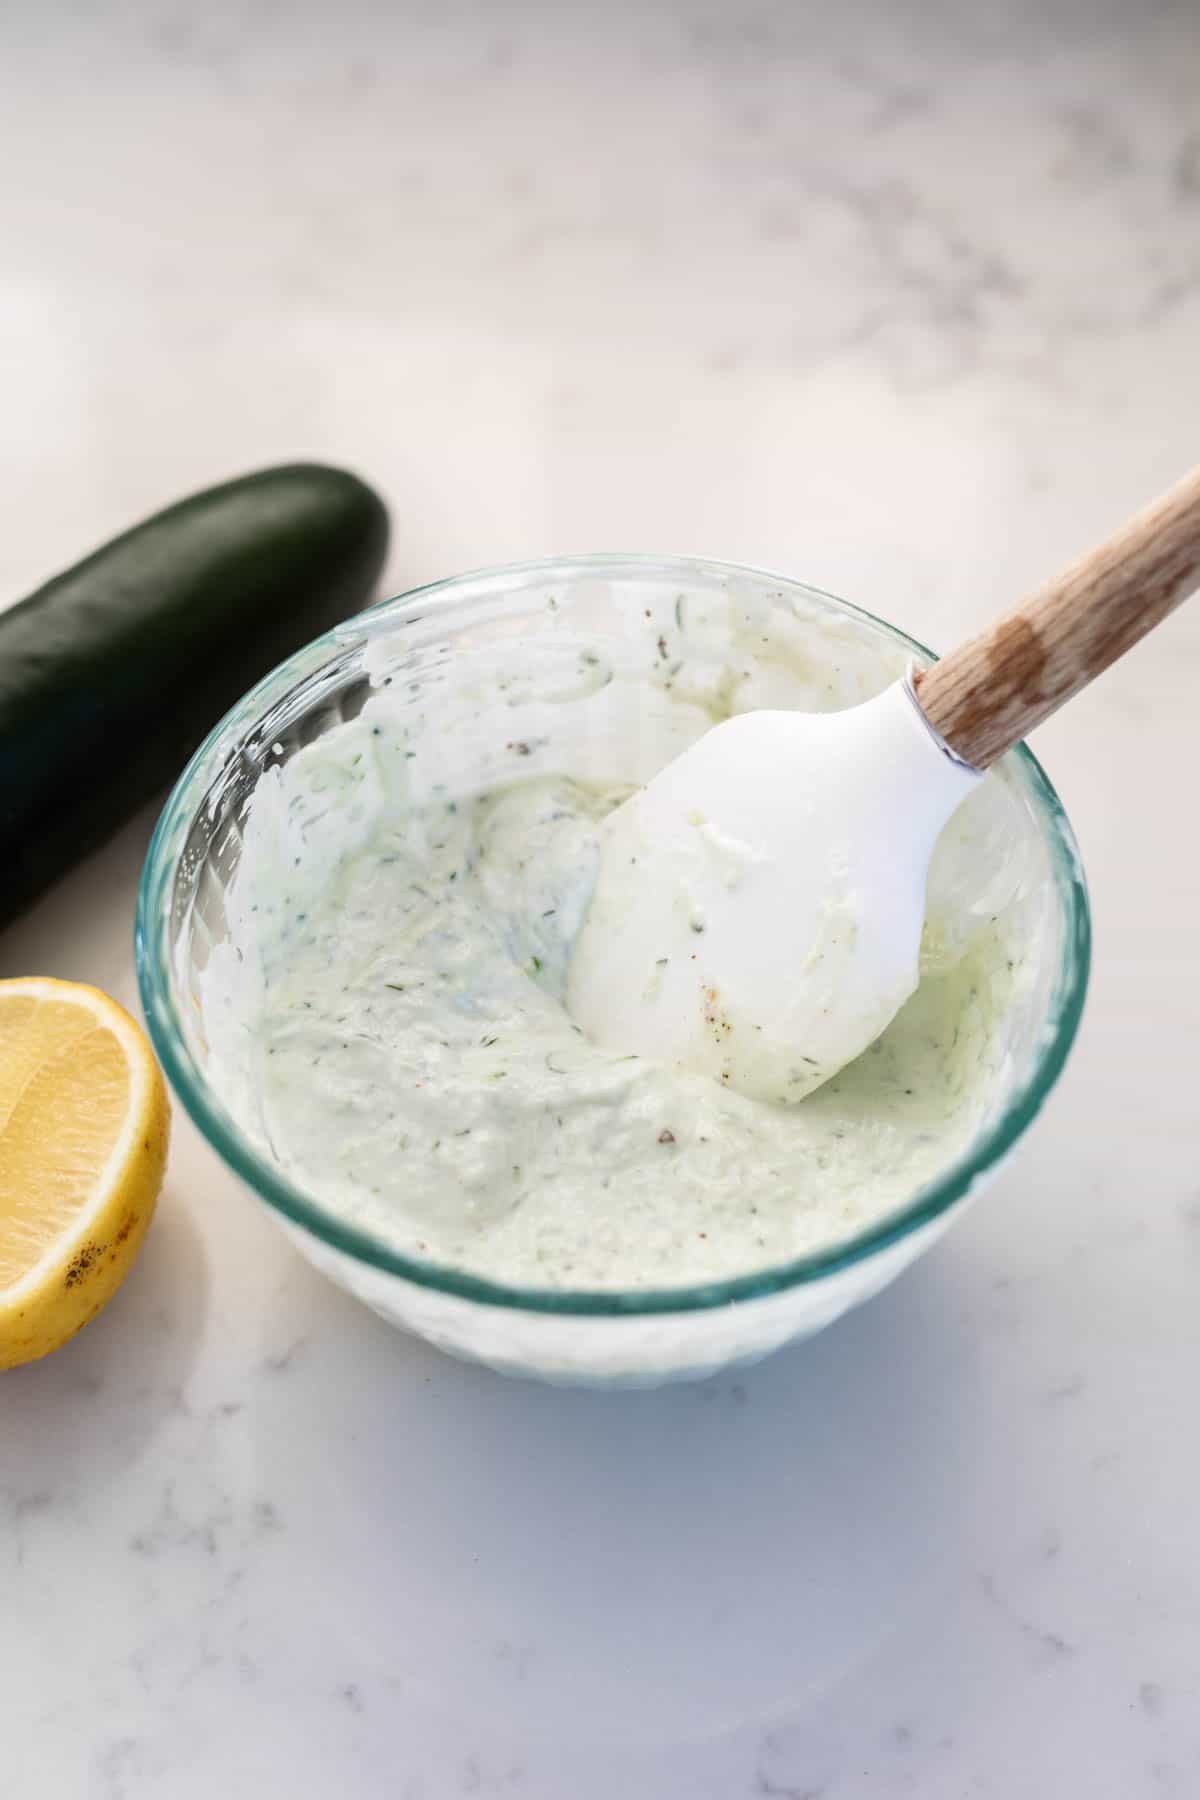 tzatziki sauce in a glass bowl with a rubber white spatula sticking out and a cucumber and lemon wedge on the side